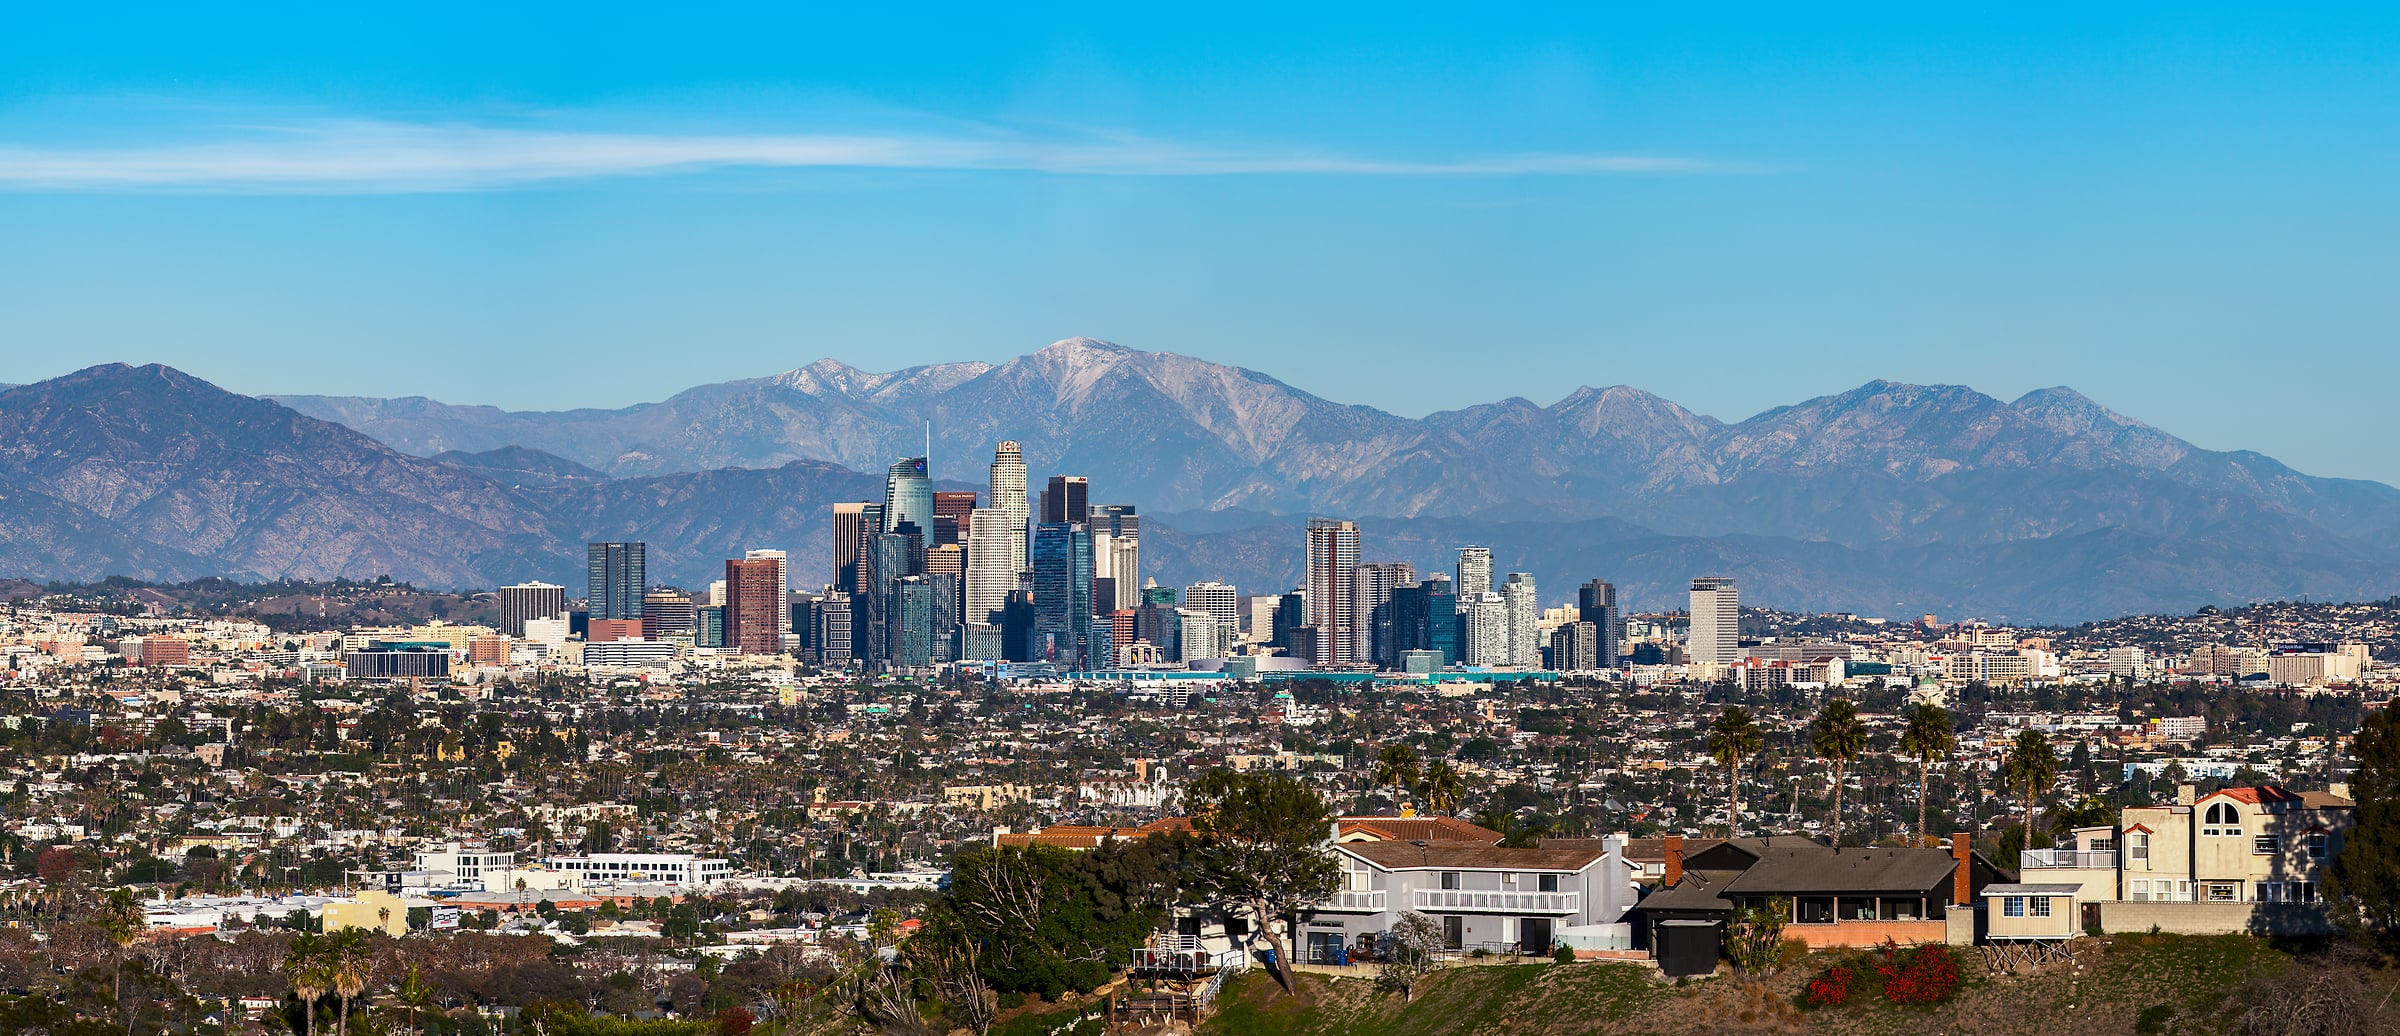 138 megapixels! A very high resolution, large-format VAST photo print of the downtown Los Angeles skyline with mountains in the background; photograph created by Jim Tarpo in Ladera Heights, Los Angeles, CA.